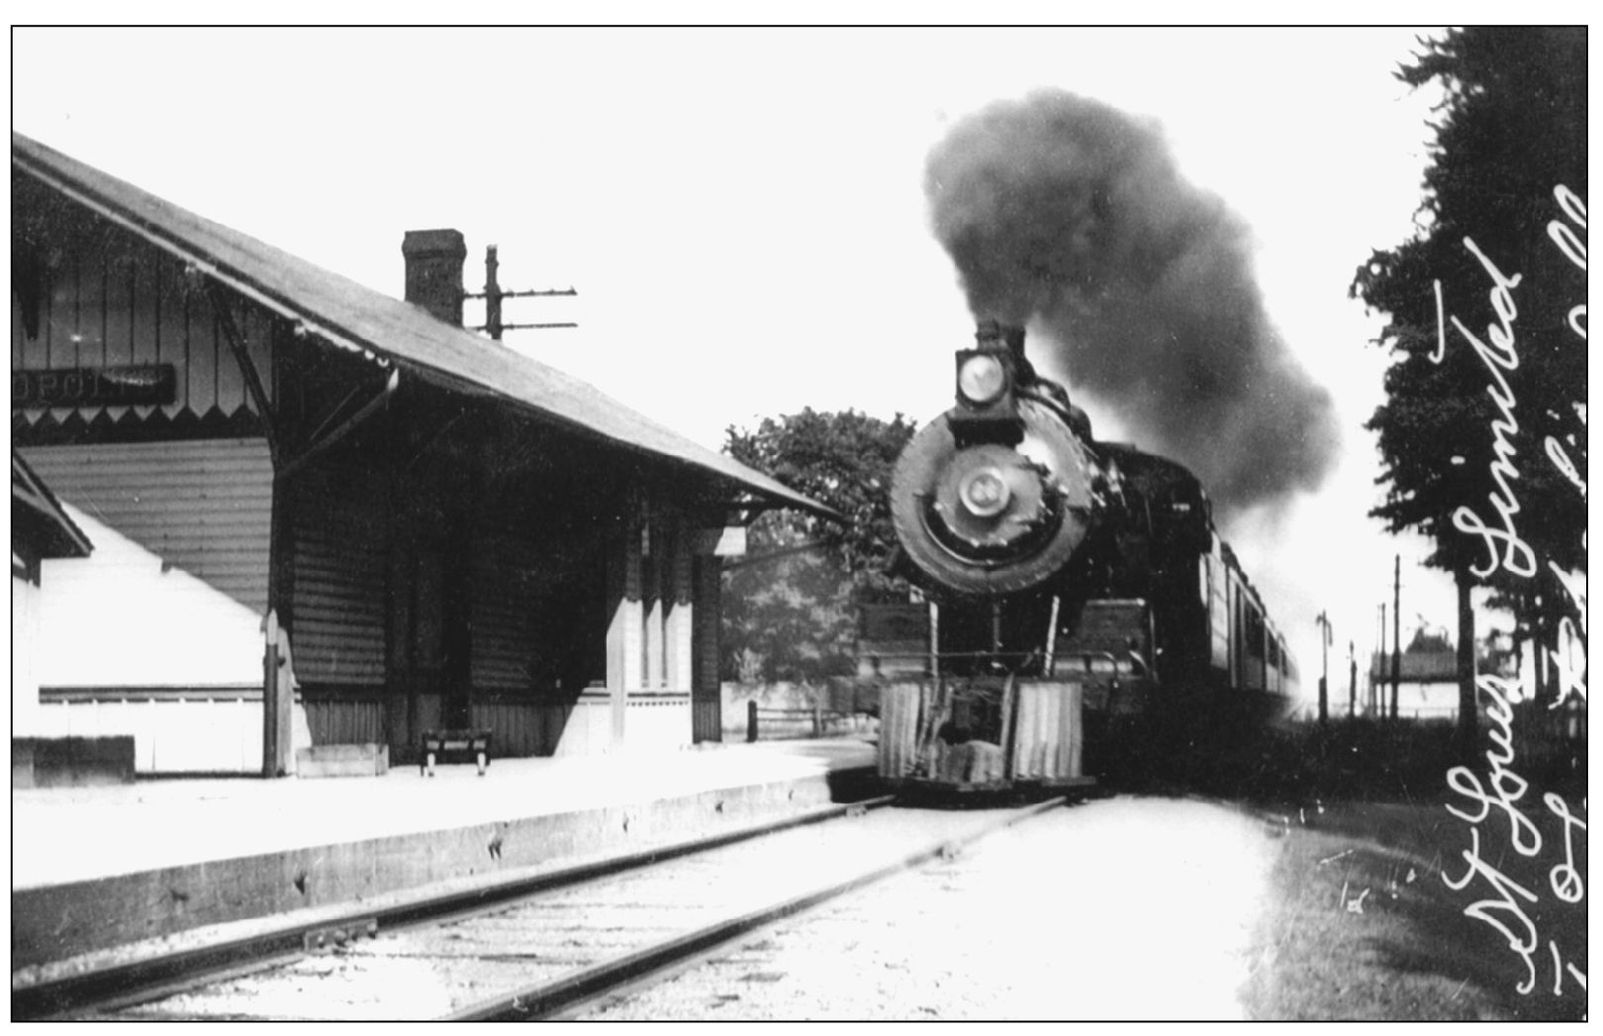 Here is the St Louis Limited swinging through the Teutopolis depot before the - photo 4